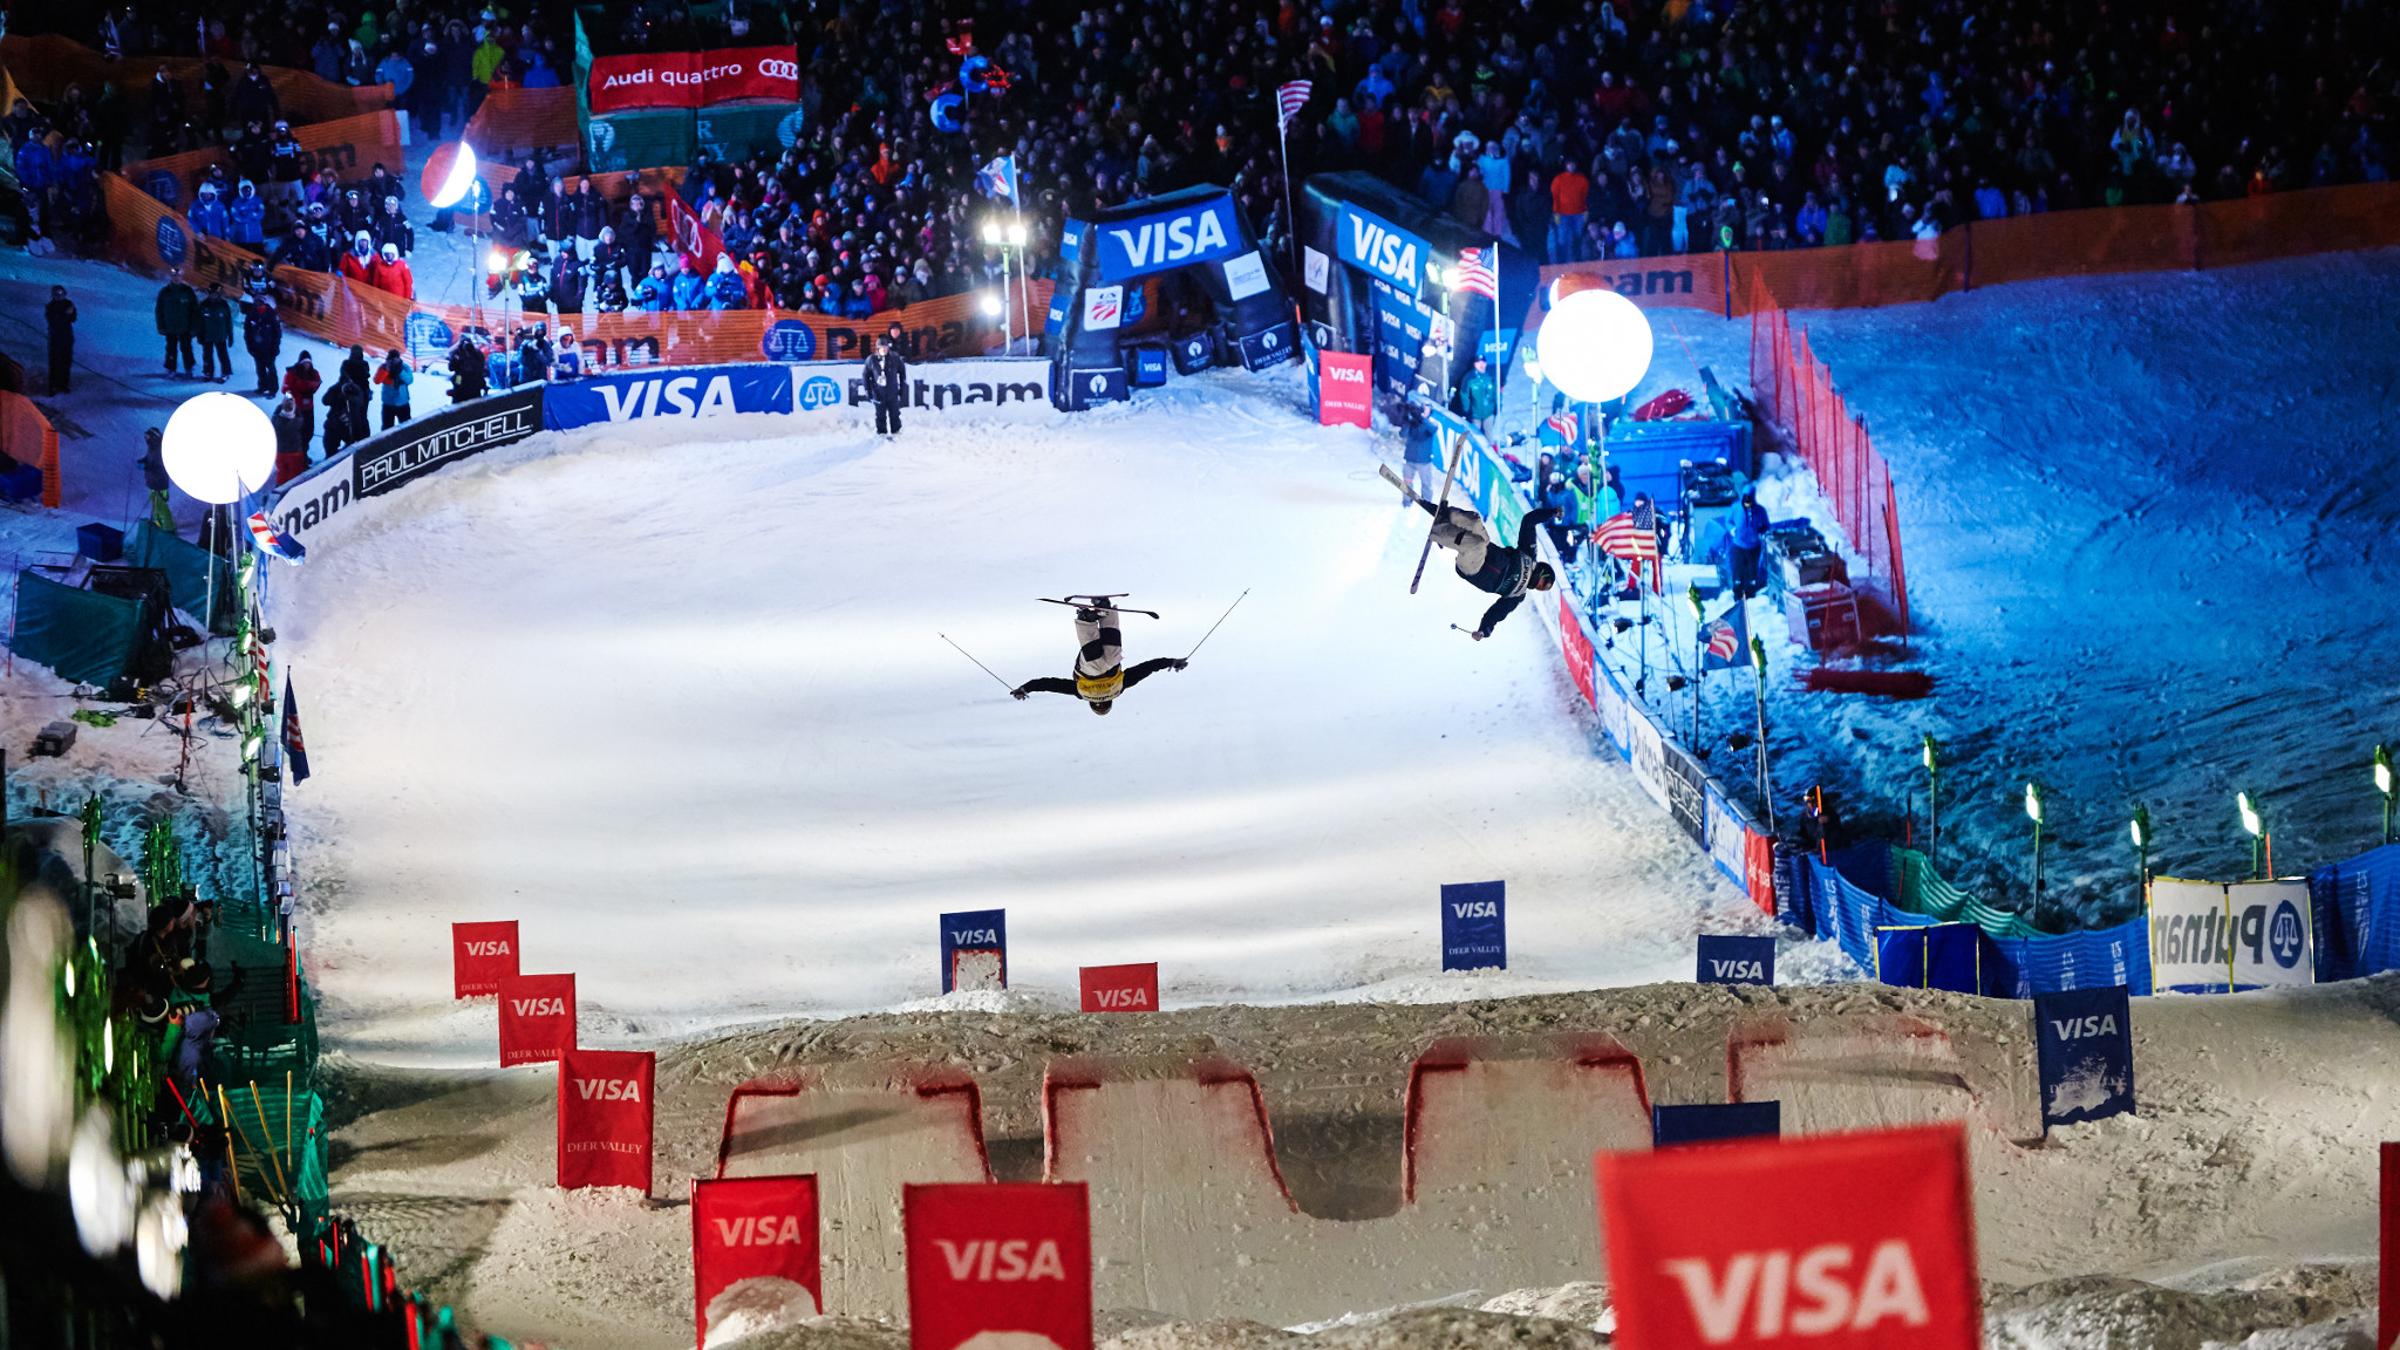 Dual mogul competition at FIS Freestyle Ski World Cup